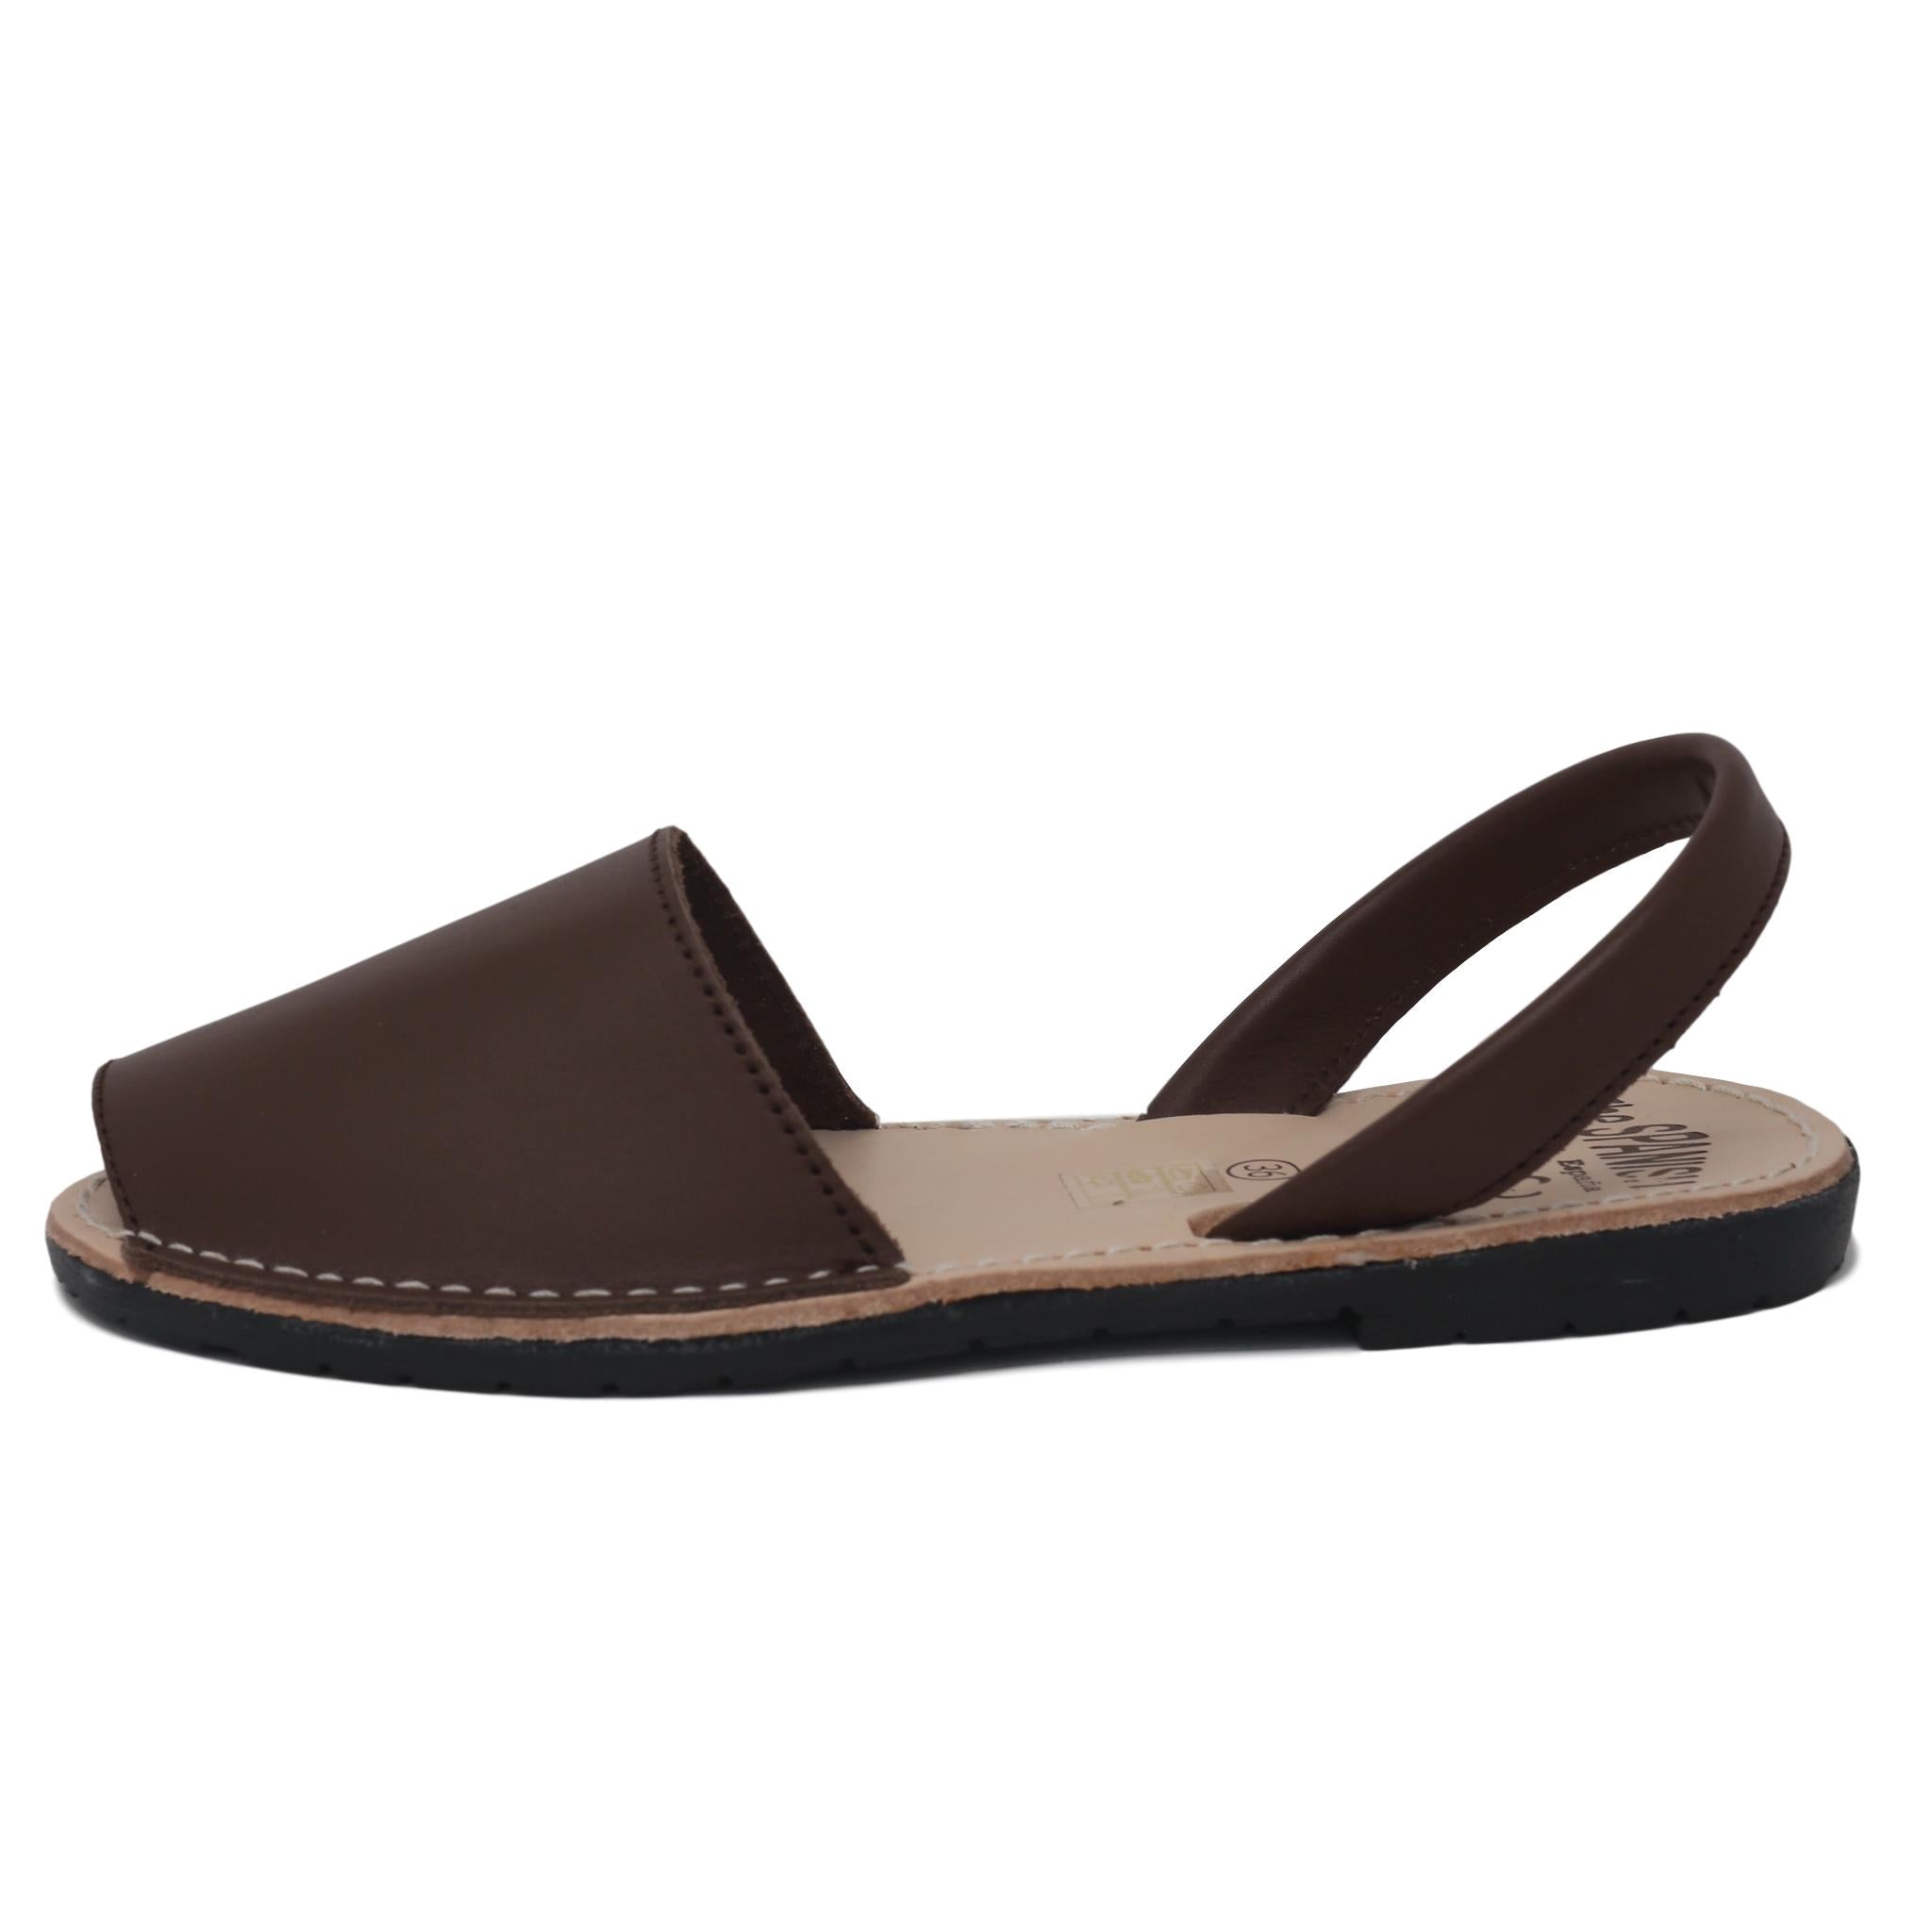 Classic Chocolate brown sandals